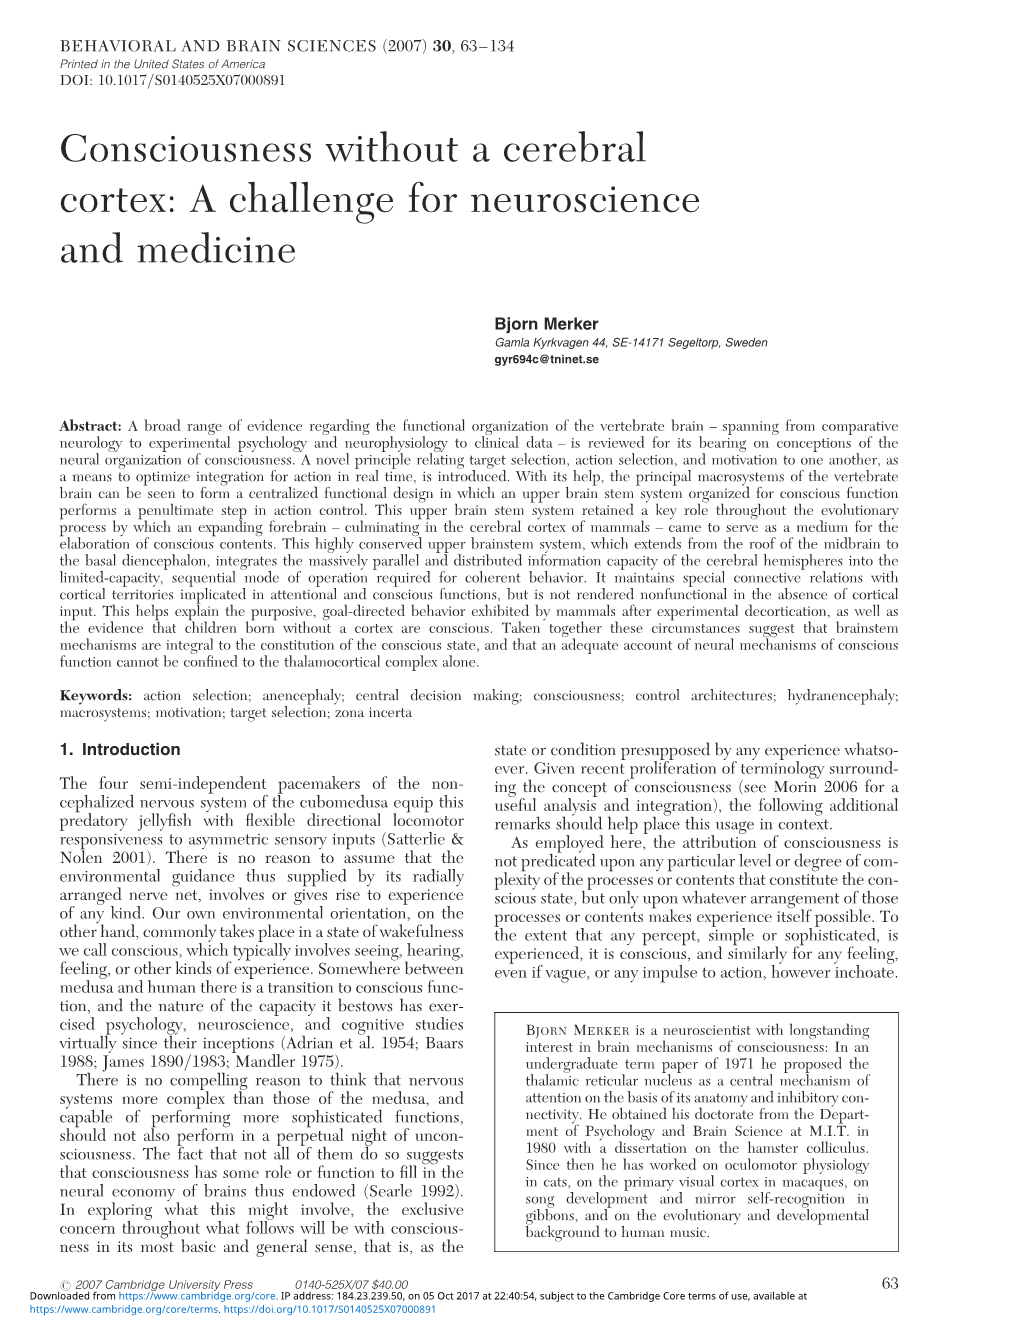 Consciousness Without a Cerebral Cortex: a Challenge for Neuroscience and Medicine